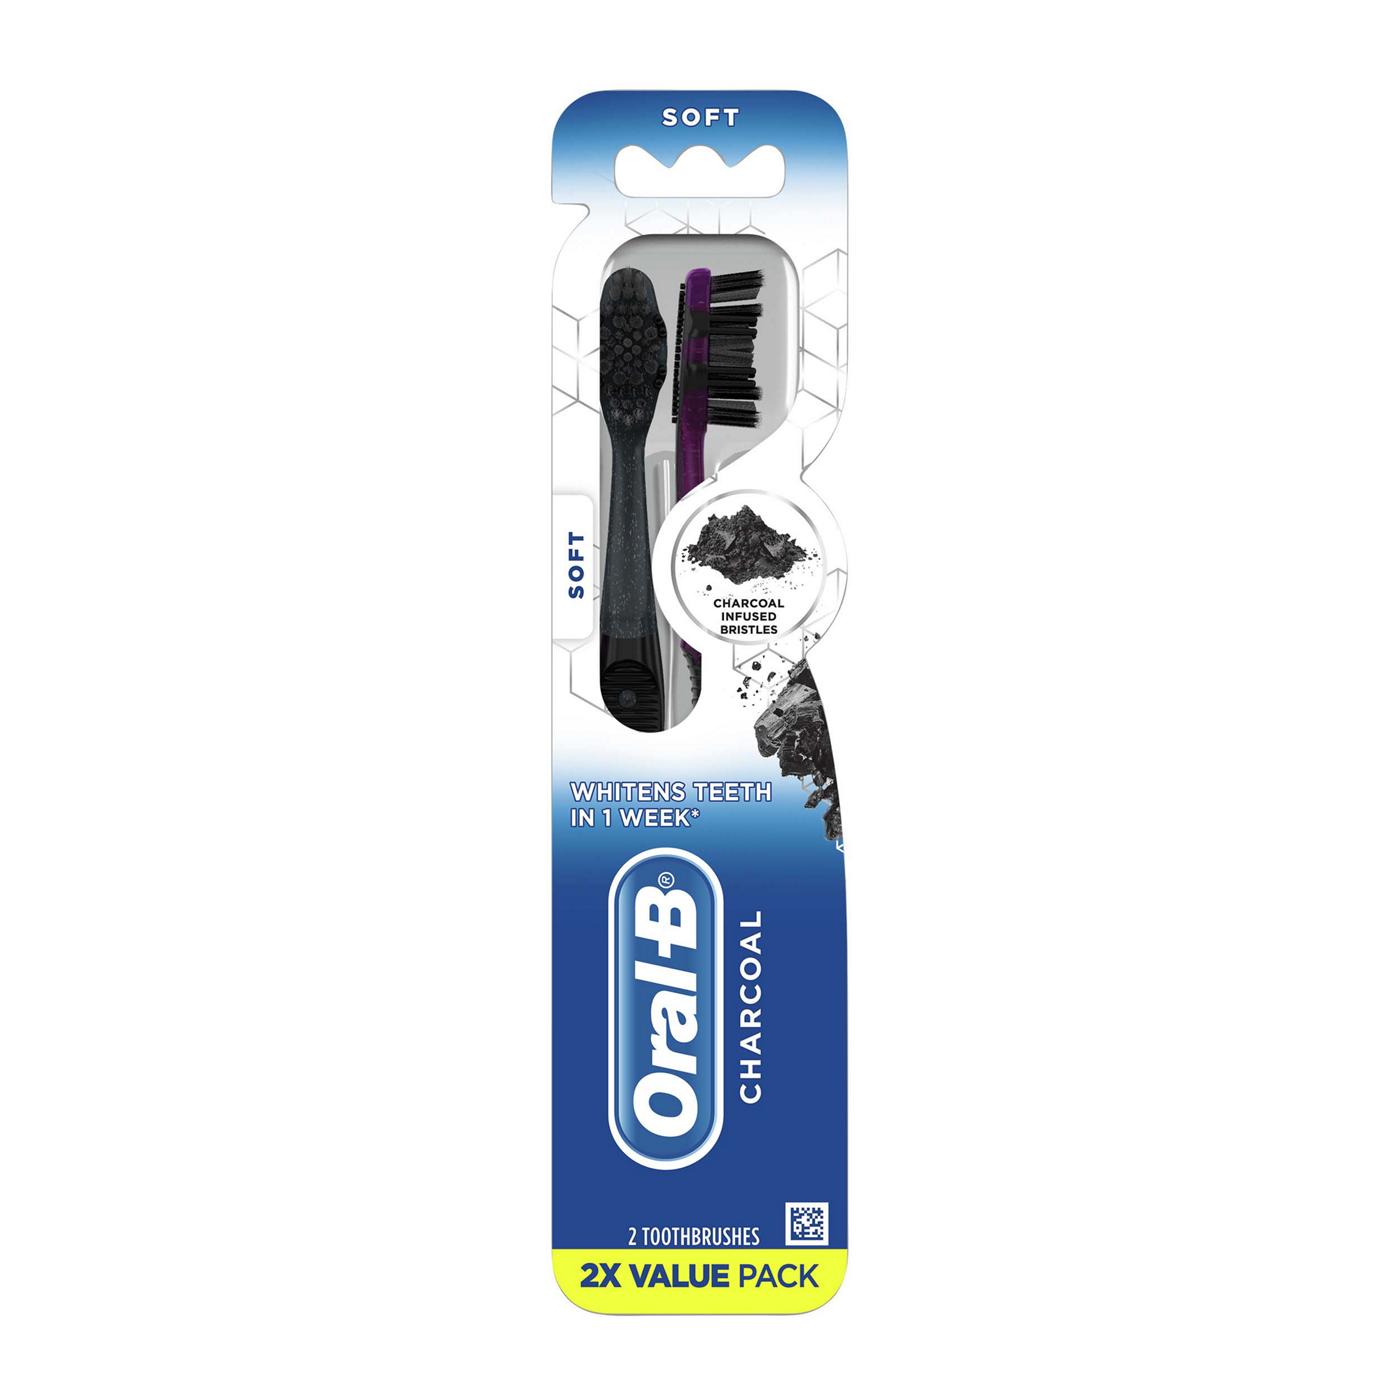 Oral-B Charcoal Toothbrushes Soft; image 1 of 10